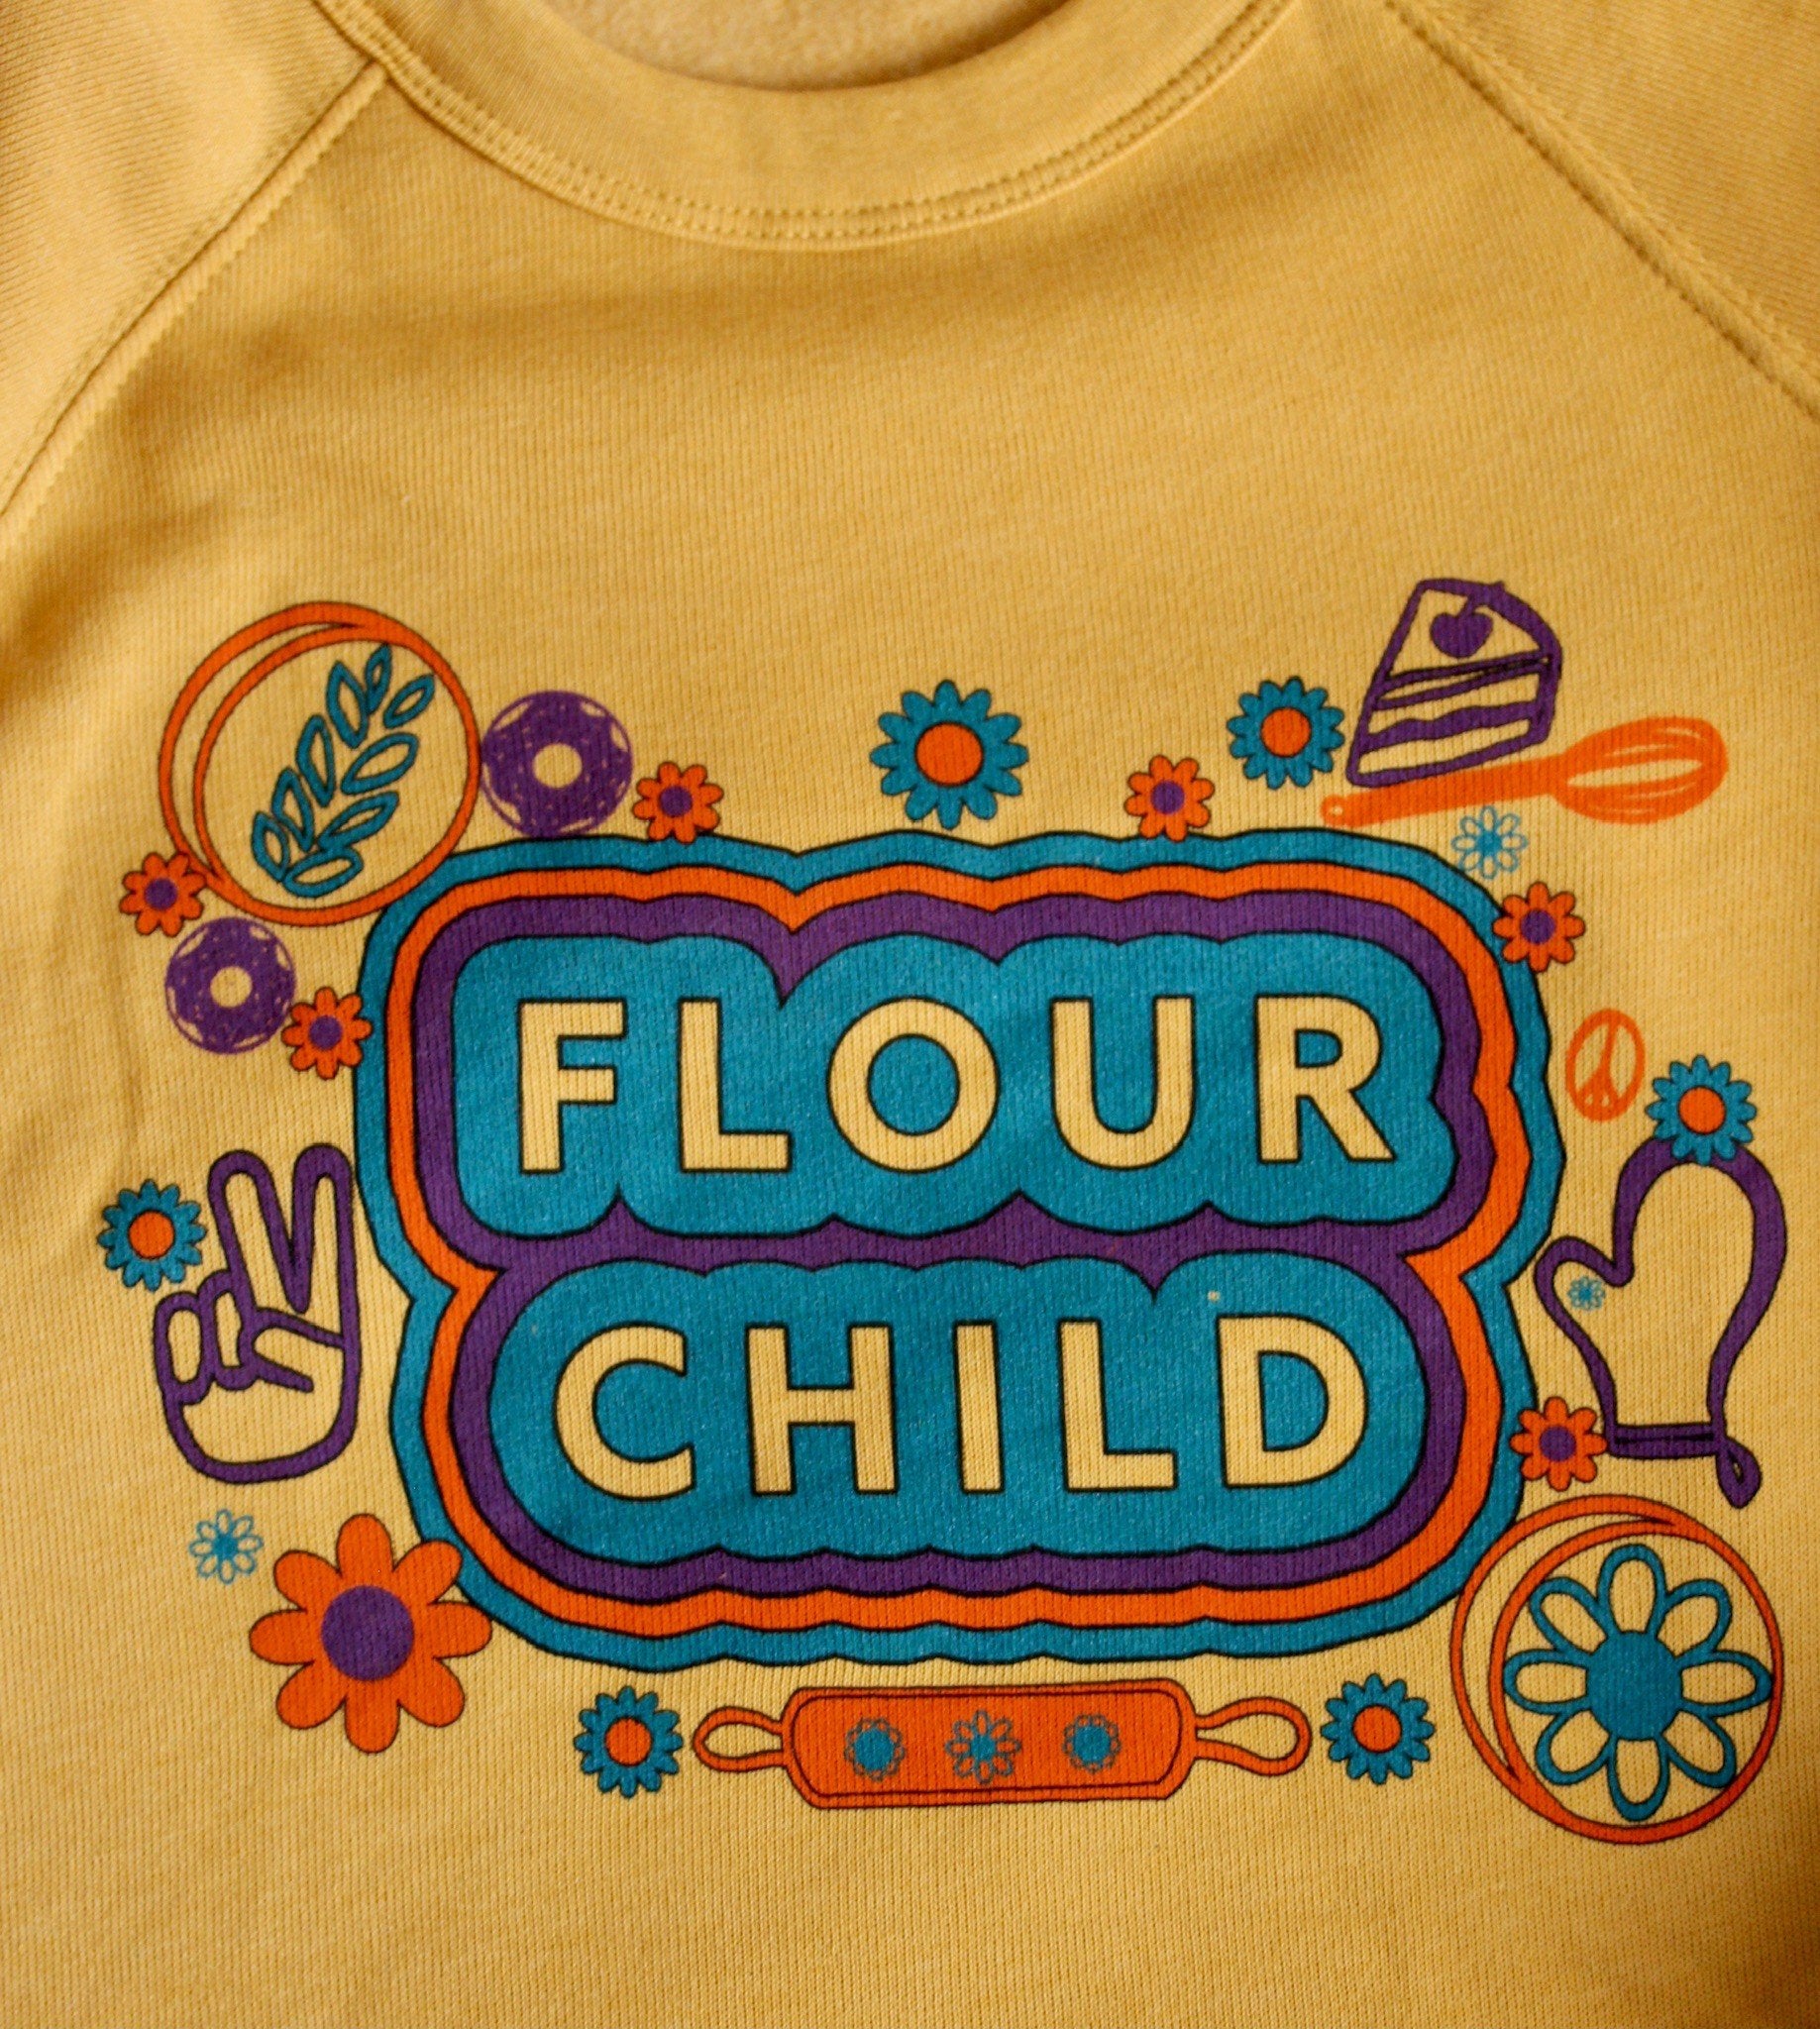 A close up of the Flour Child logo and kitchen and hippie designs